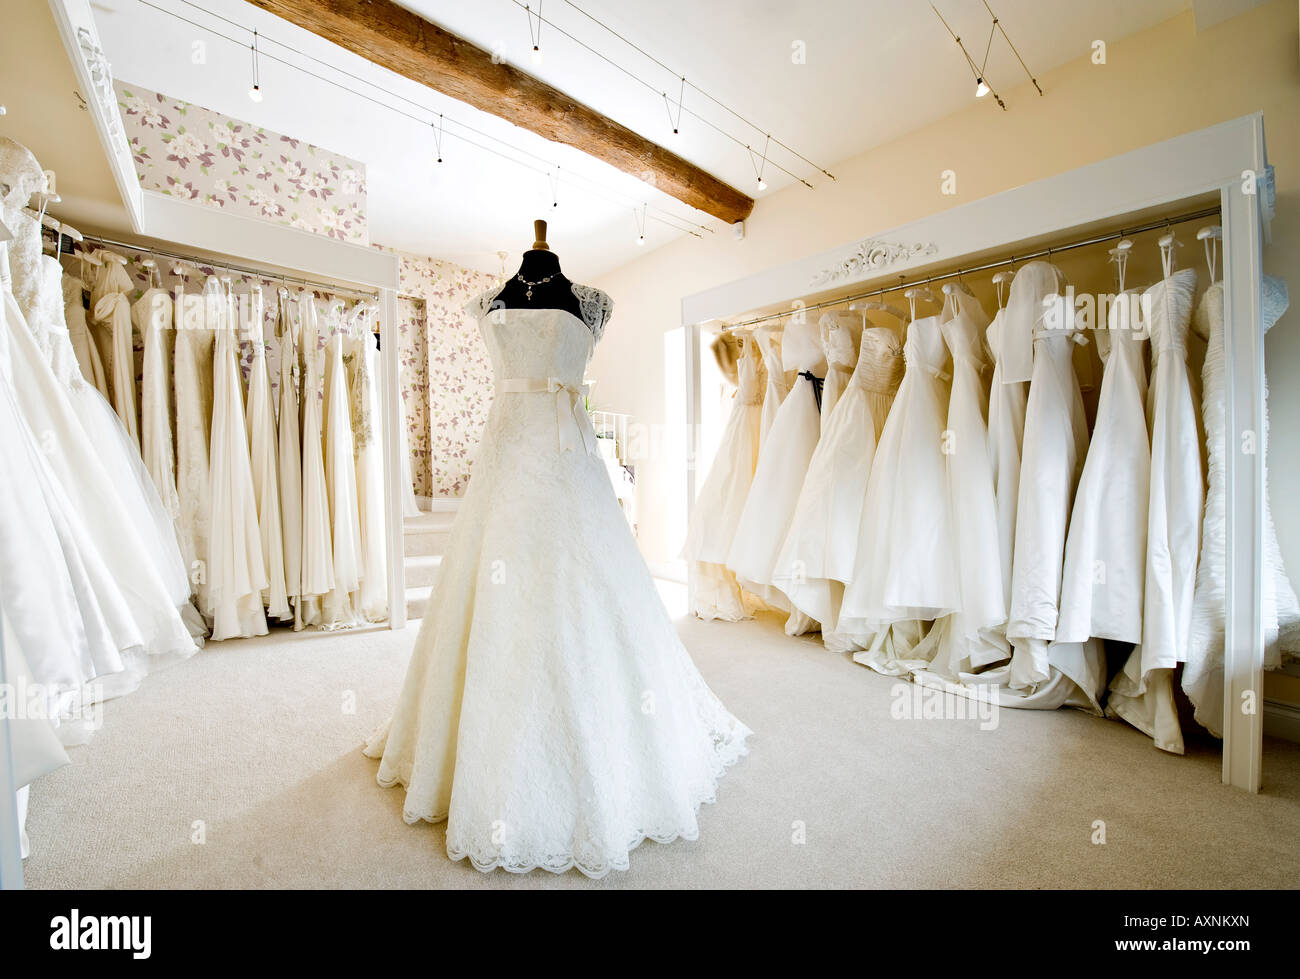 interior of wedding dress gown in bridal boutique shop 